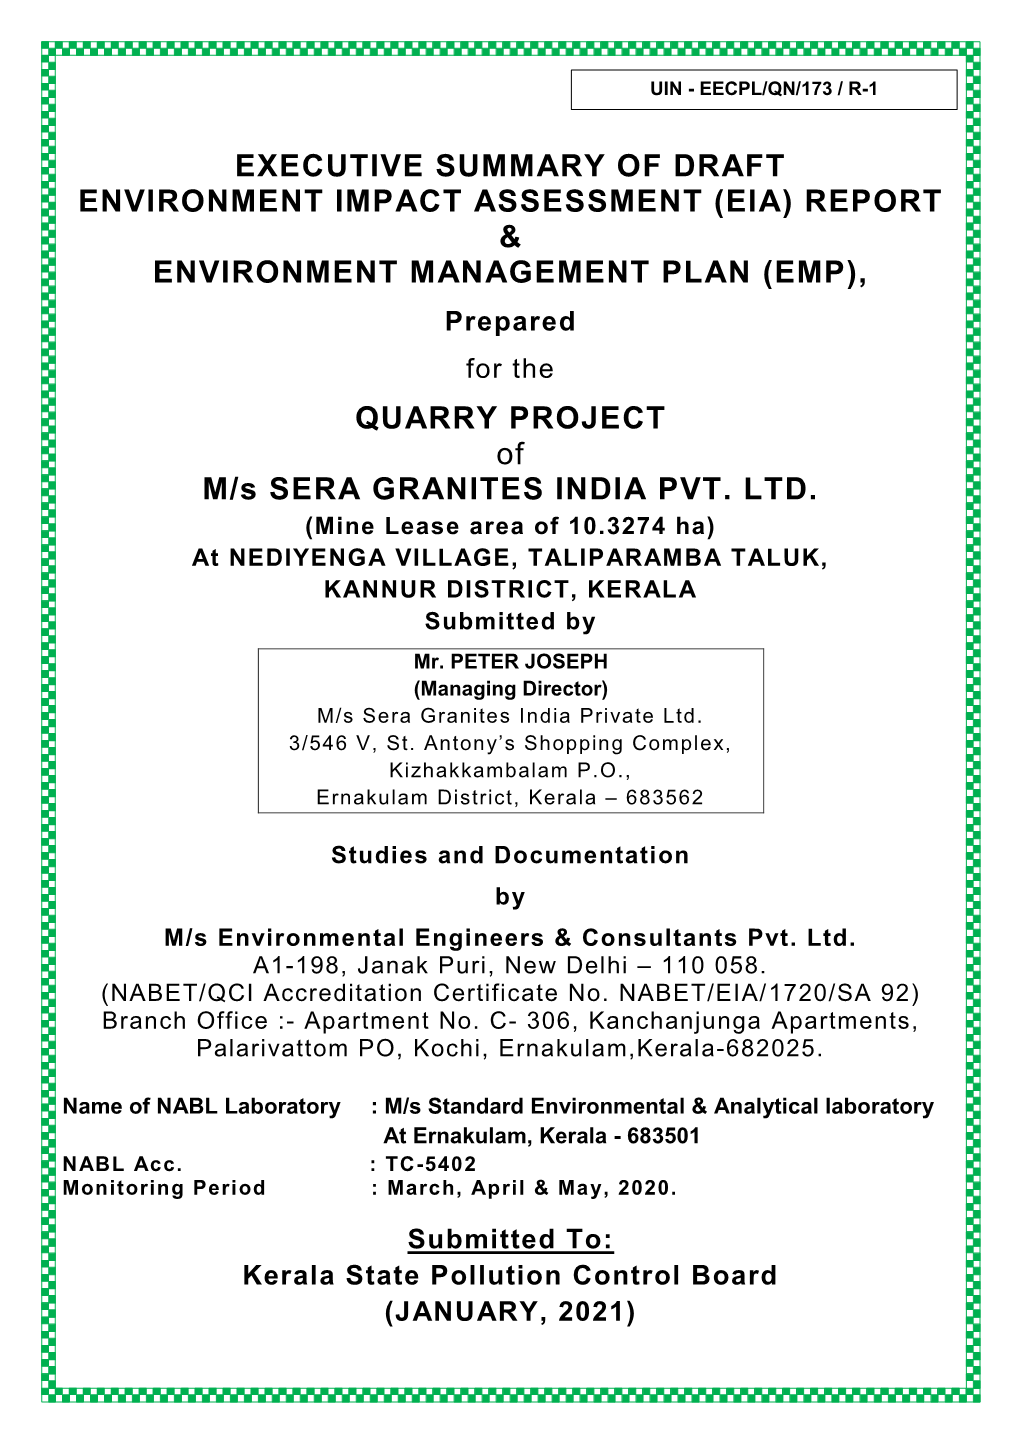 Executive Summary of Draft Environment Impact Assessment (Eia) Report ...